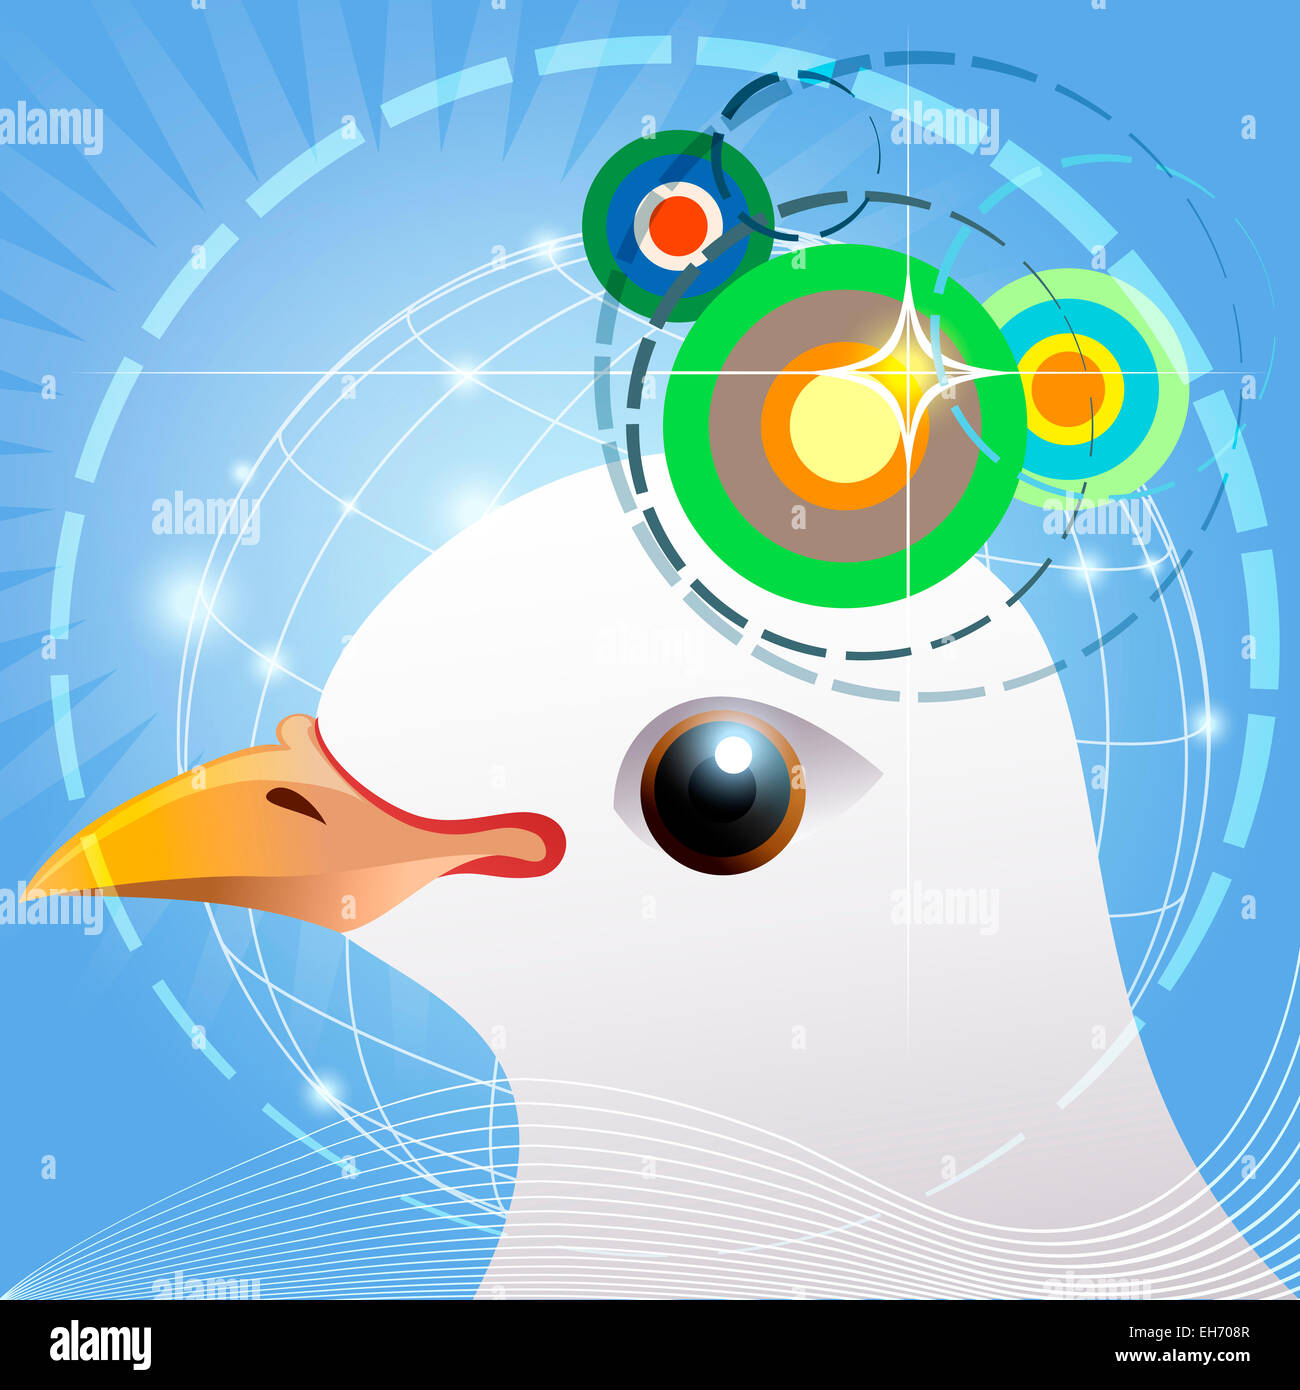 Illustration with bird head against colored circles and globe as allegory of animal magnetic navigation system Stock Photo